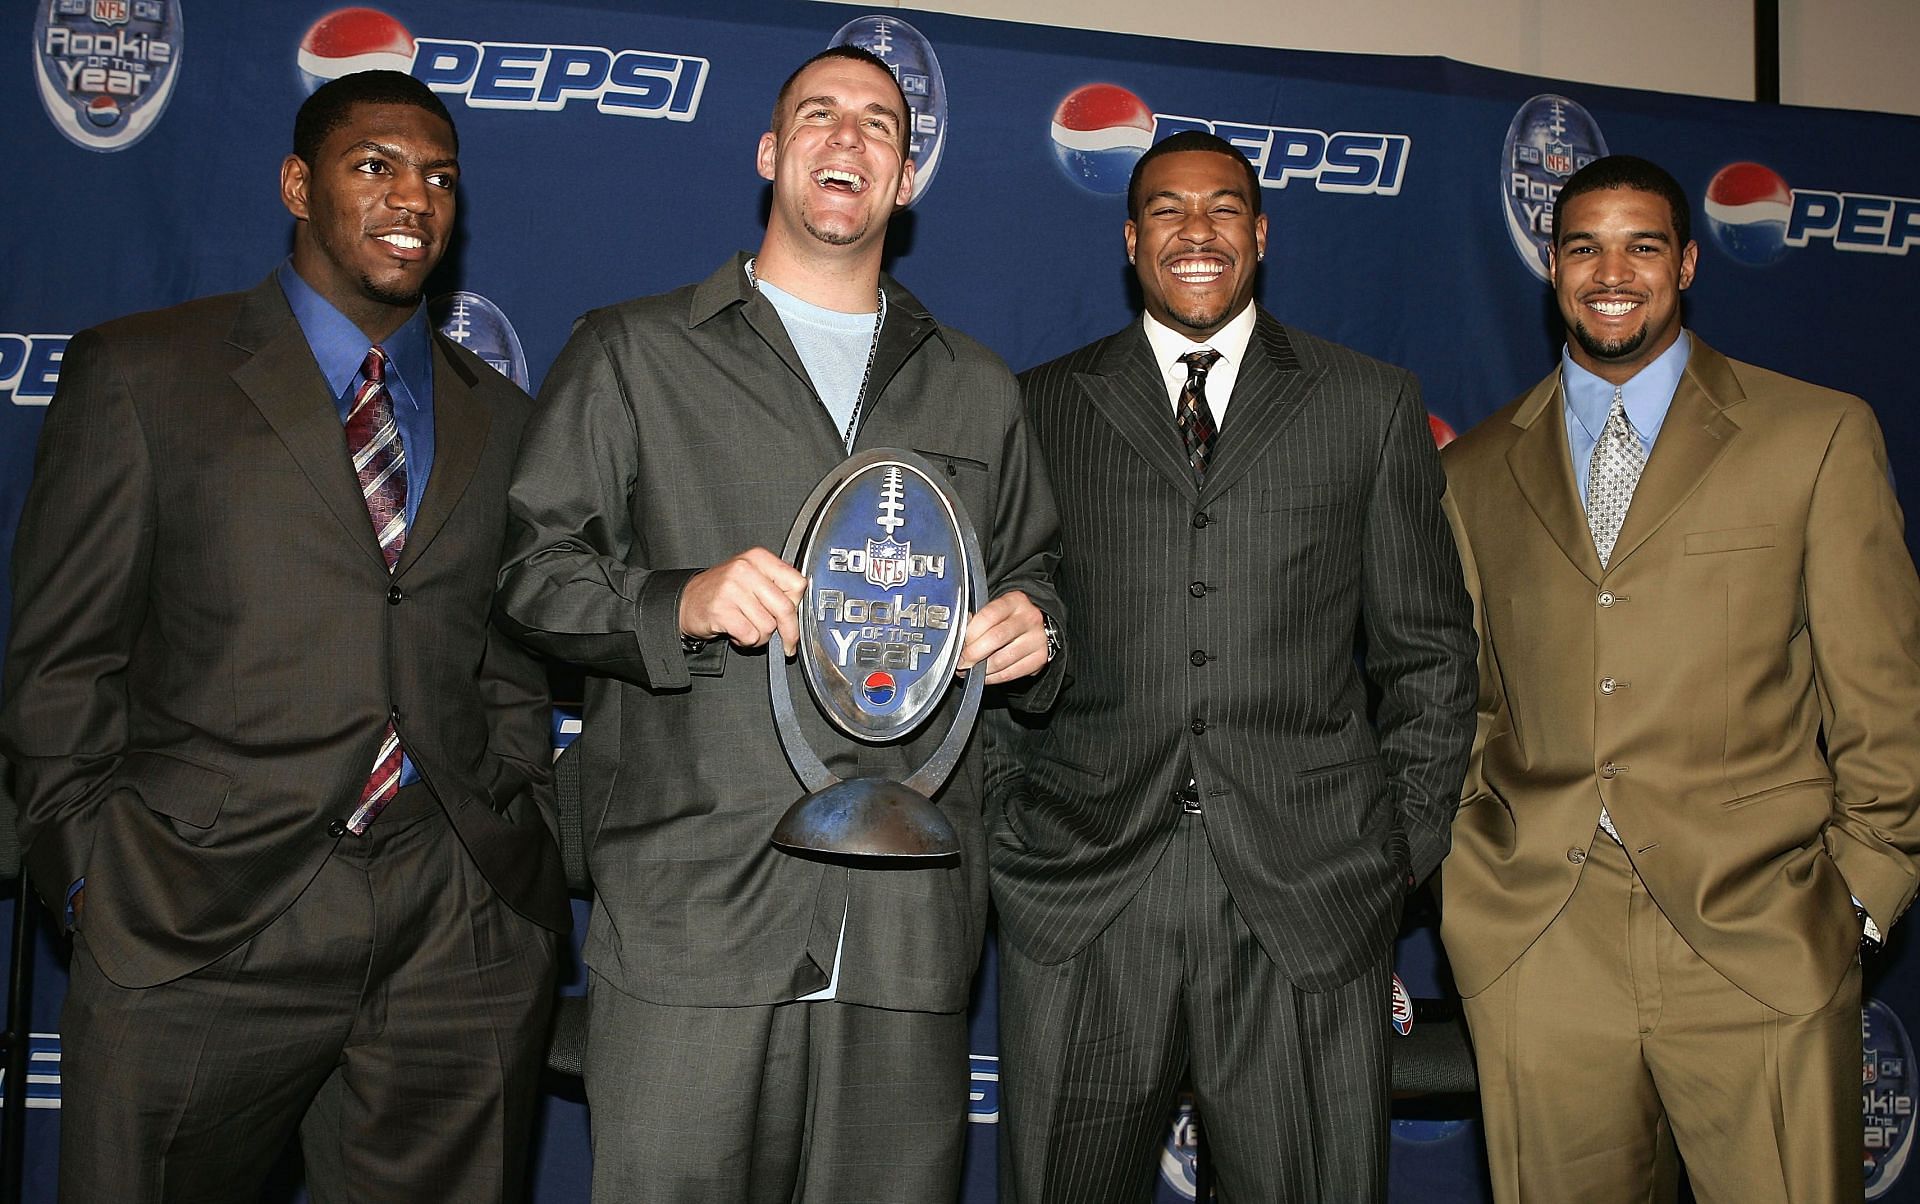 2004 NFL Rookie of the Year award ceremony